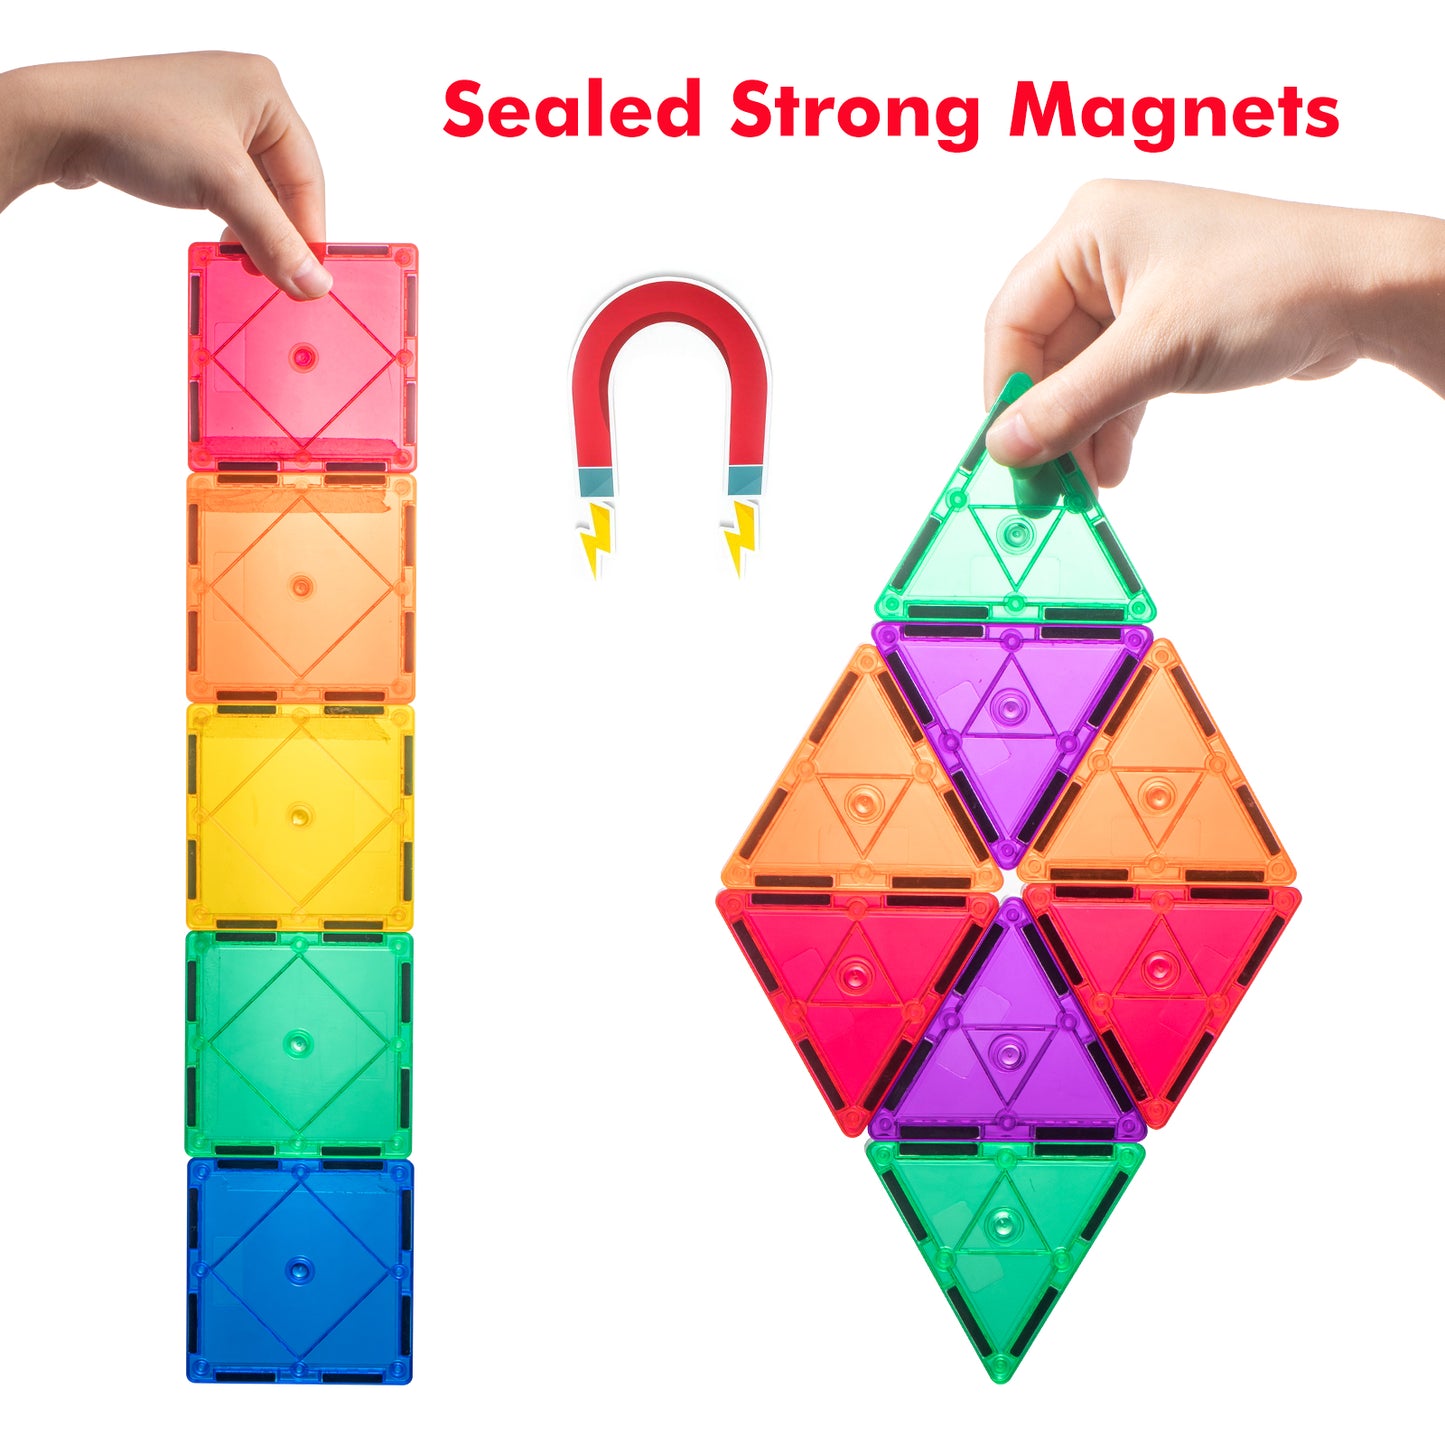 PLUMIA Magnets for Kids Learning Toys Magnetic Building Blocks Educational Toddler Toys Magnetic Tiles STEM Toys Gift for 3 4 5 Year Olds Boys and Girls